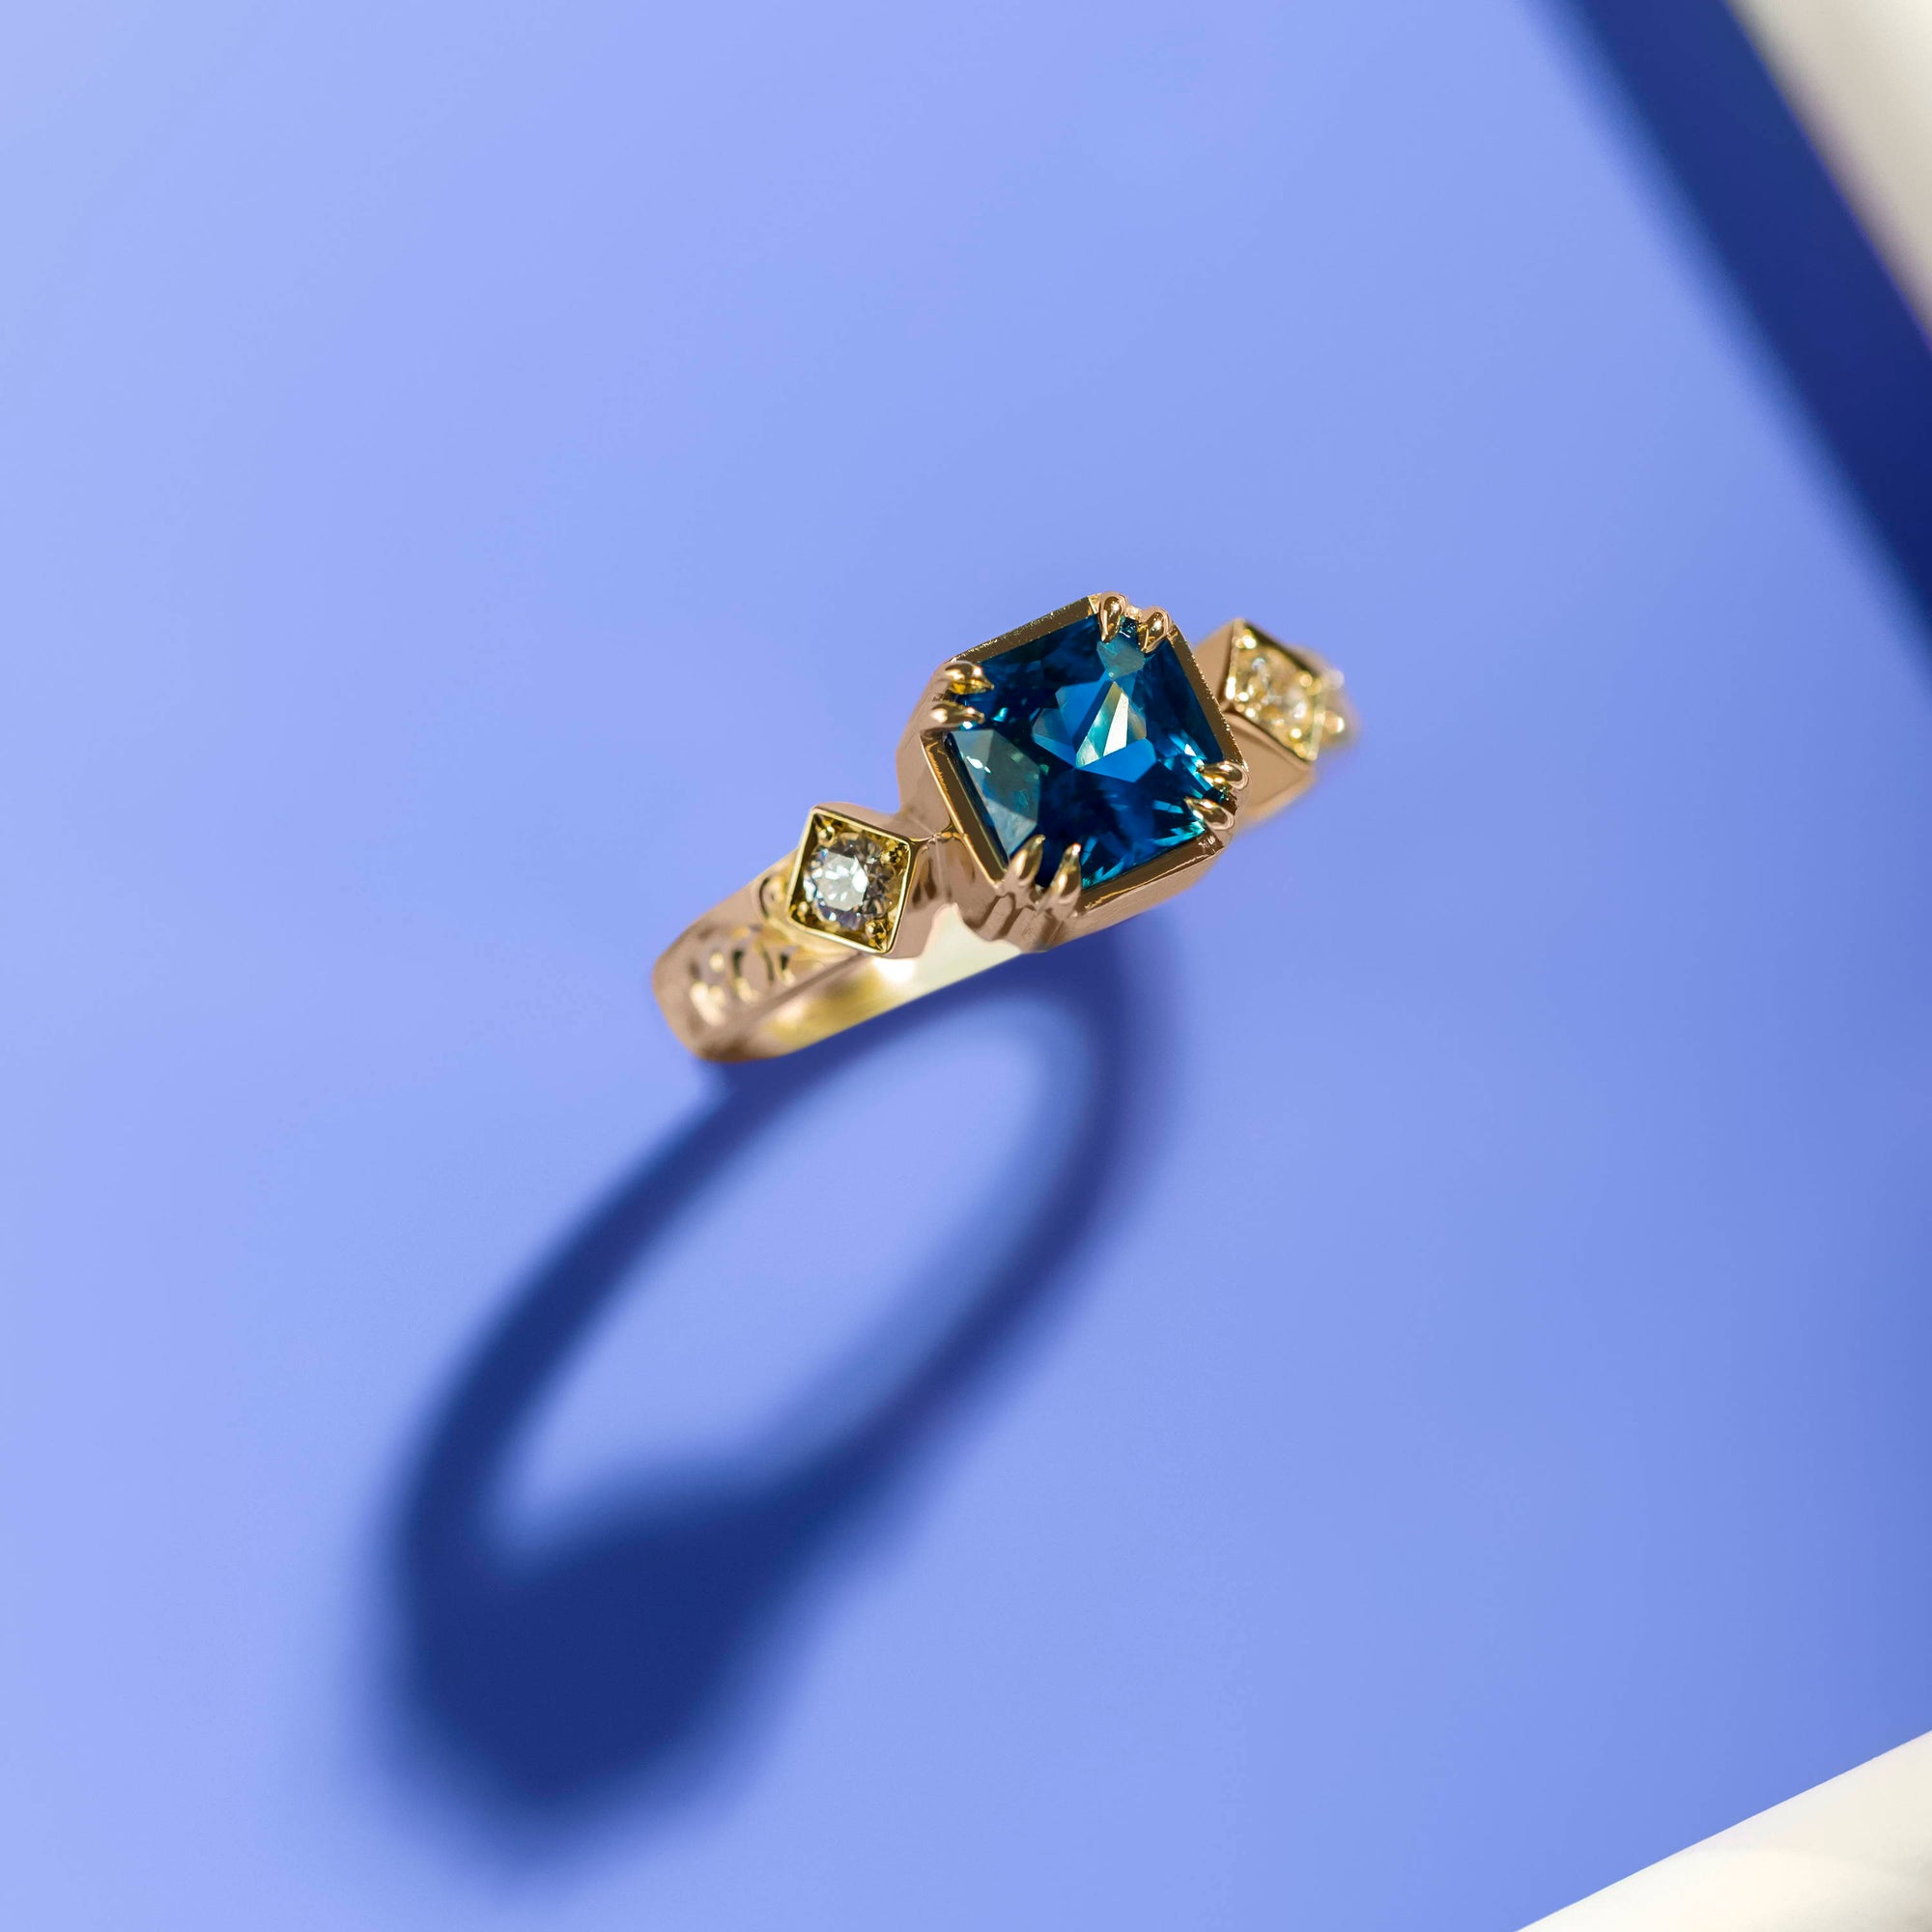 The Spiritual Meaning Behind Your Favorite Gemstones